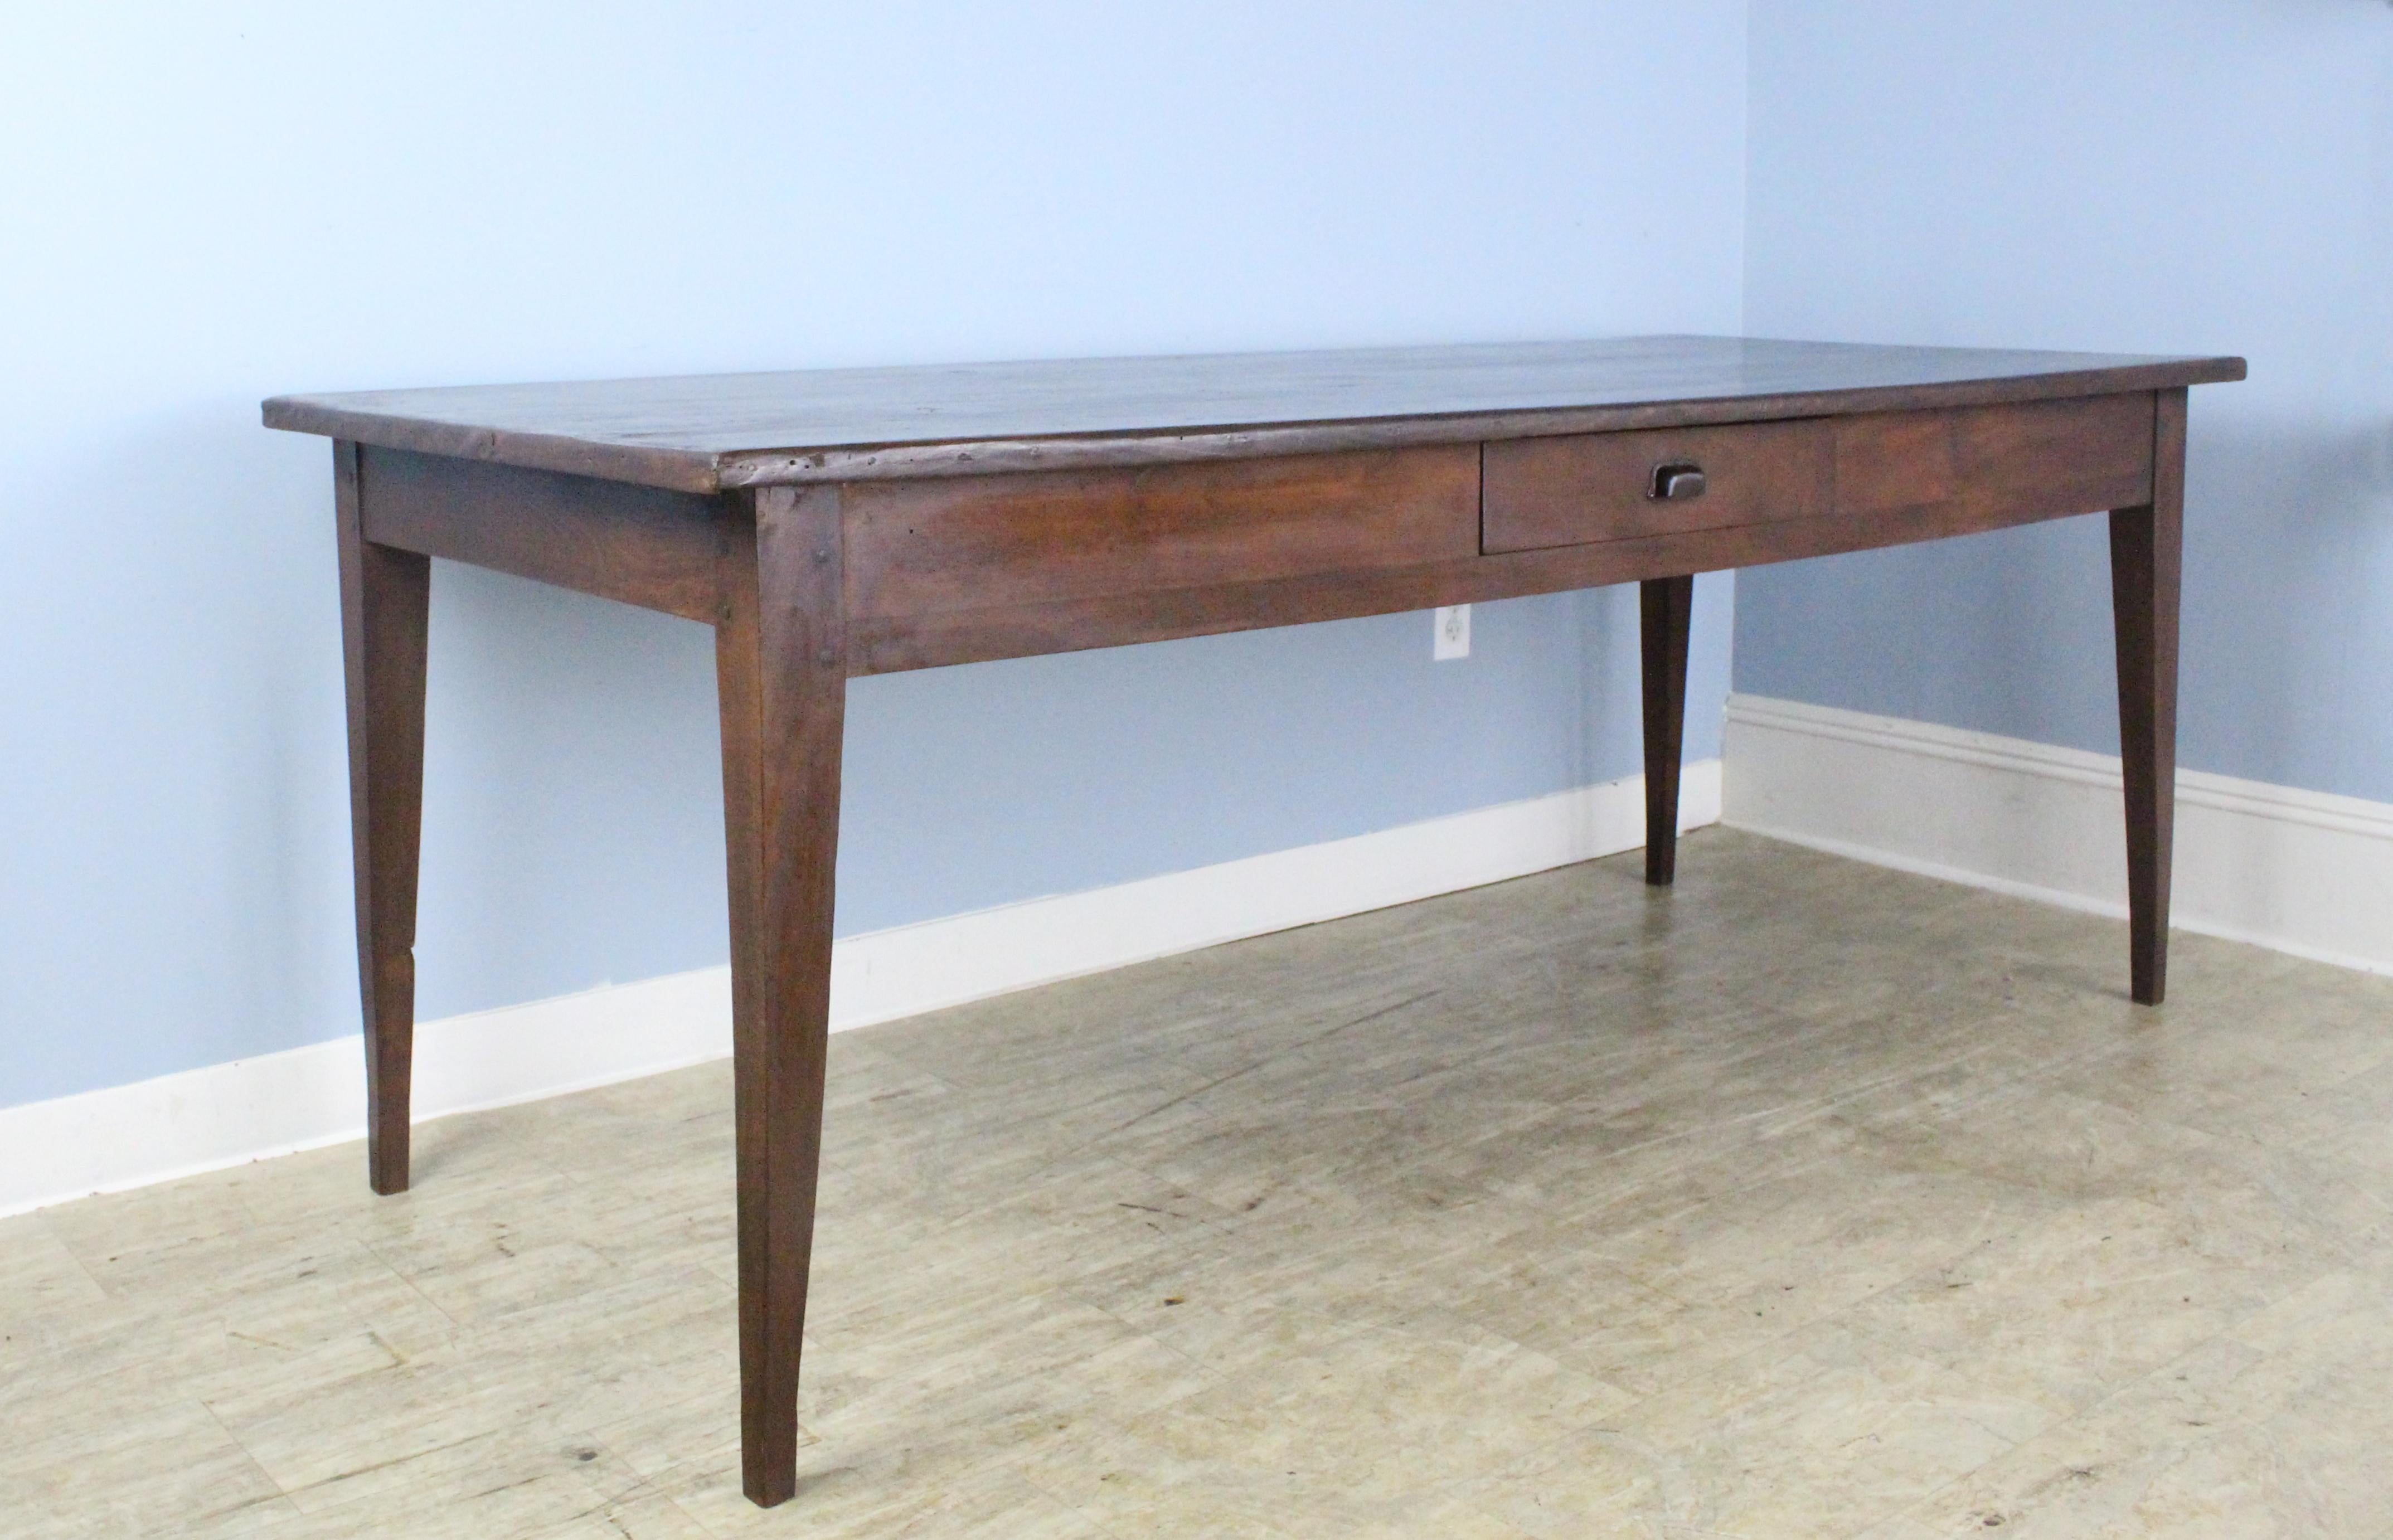 A handsome French dining or farm table with a chestnut base and framed poplar top. Rich color and nice patina. This table has a single roomy drawer. Apron height of 23.75 inches on the long sides and 25 inches at the ends. There are 73.5 inches